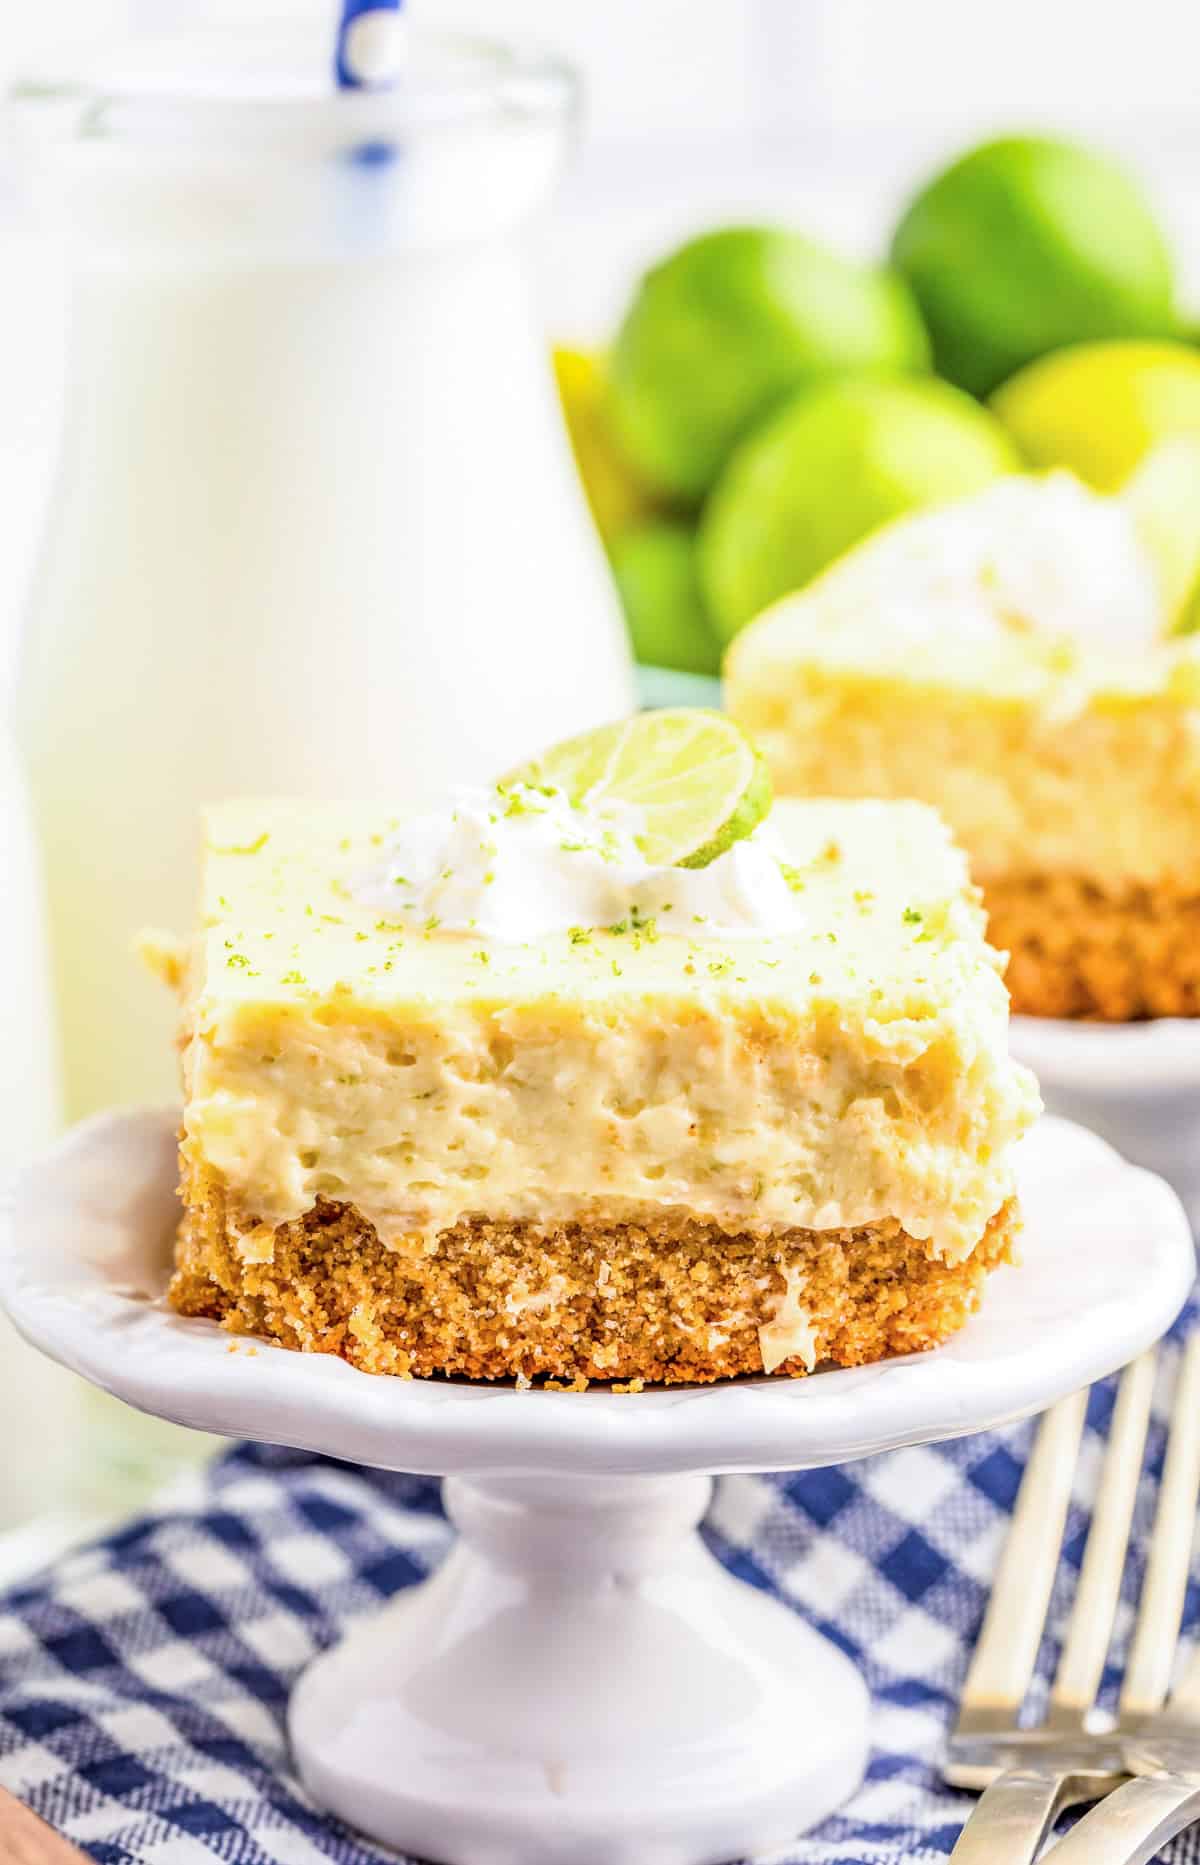 One of the Key Lime Pie Bars on mini white stand garnished with whipped cream, lime zest and lime slices with milk and limes in background.